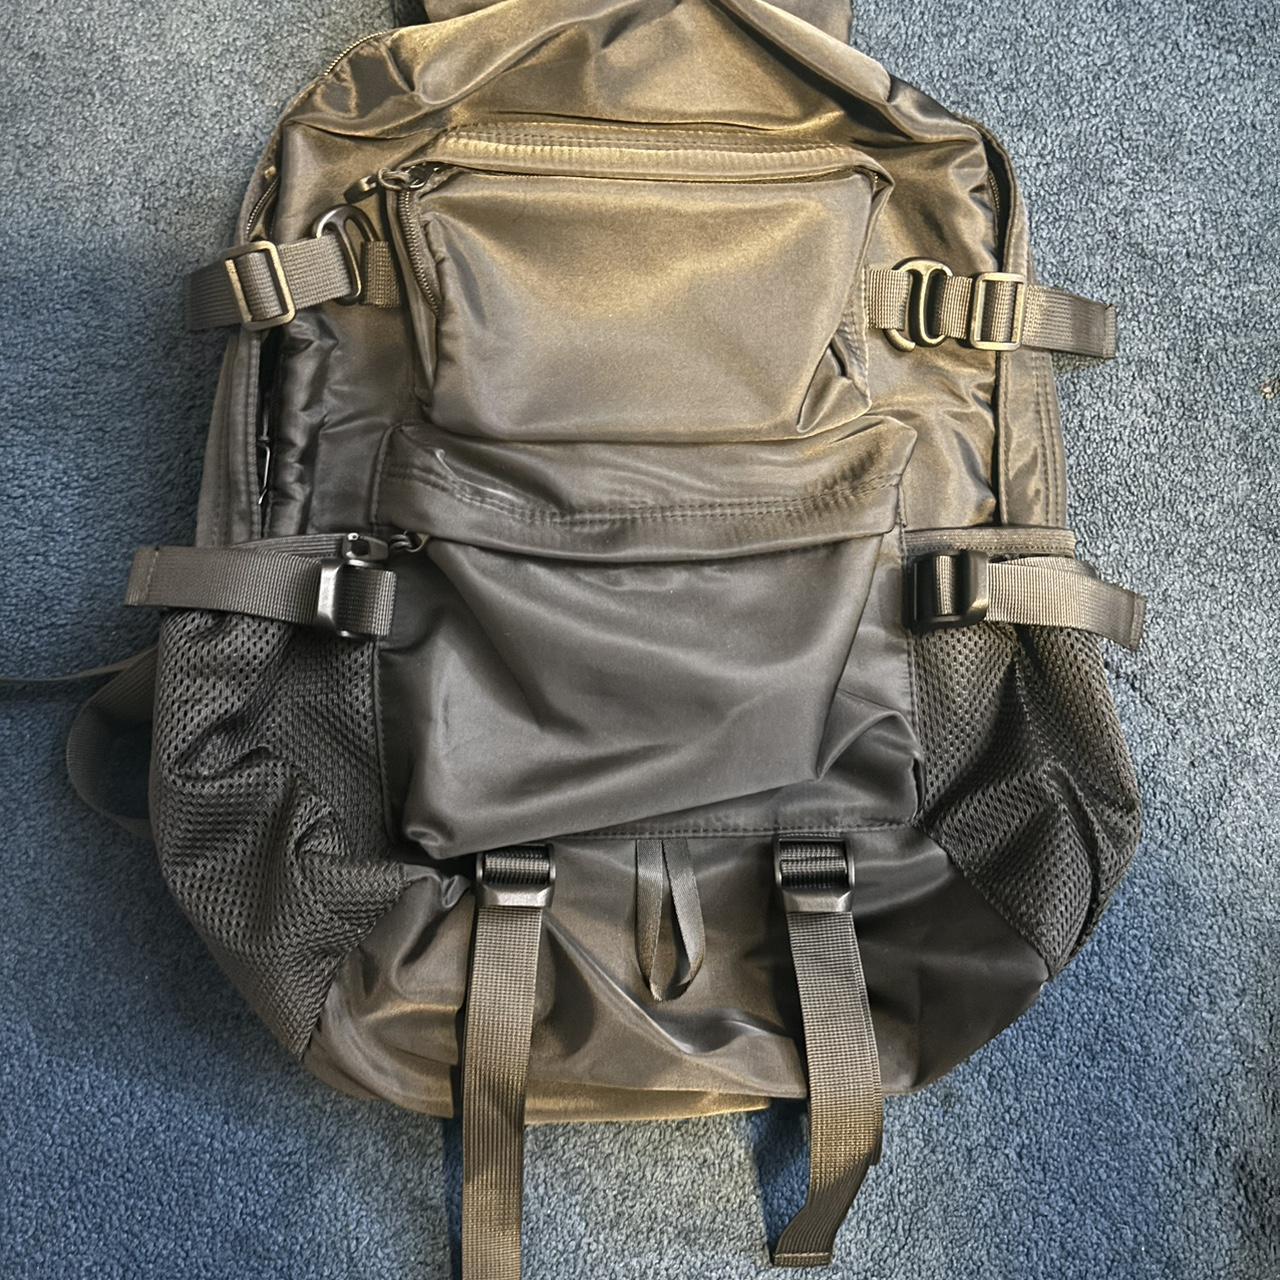 Kotemes backpack New with no tags - Depop